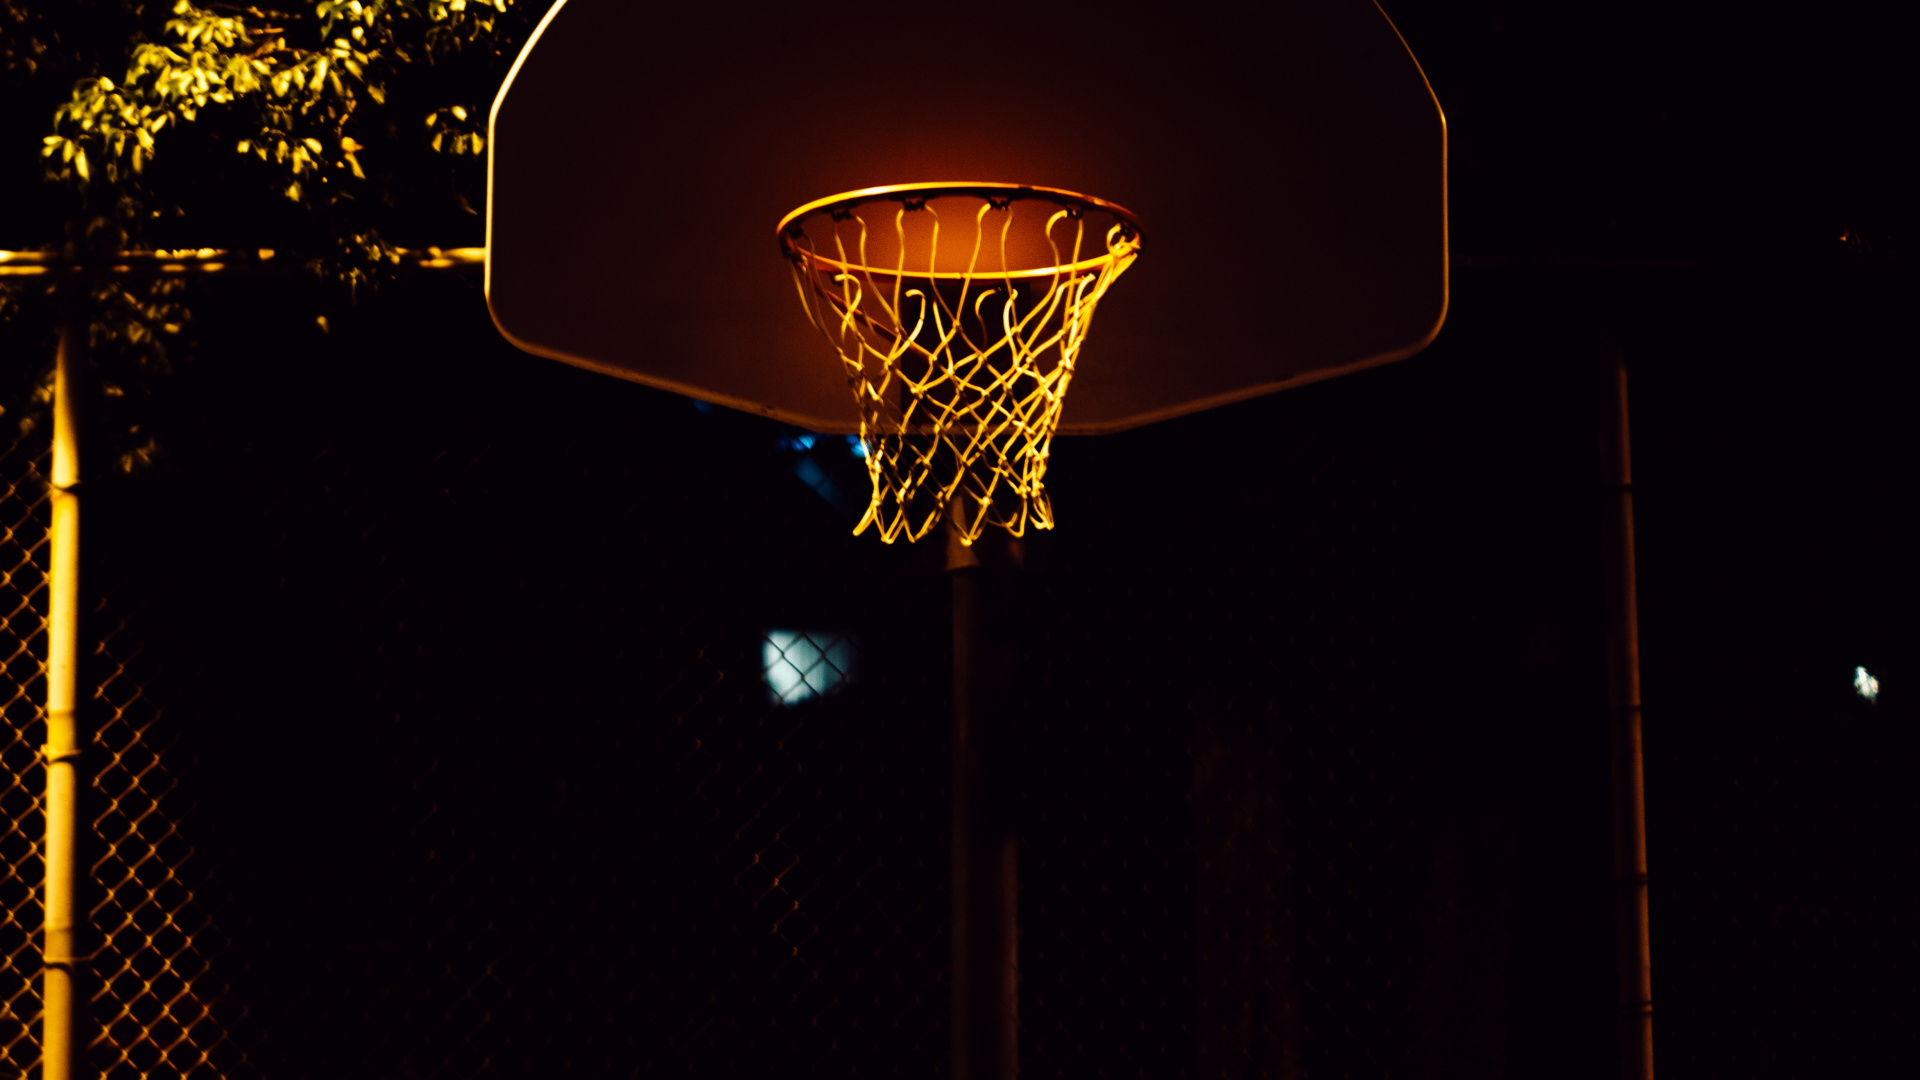 Basketball Hoop With Light Turned on During Night Time. Wallpaper in 1920x1080 Resolution